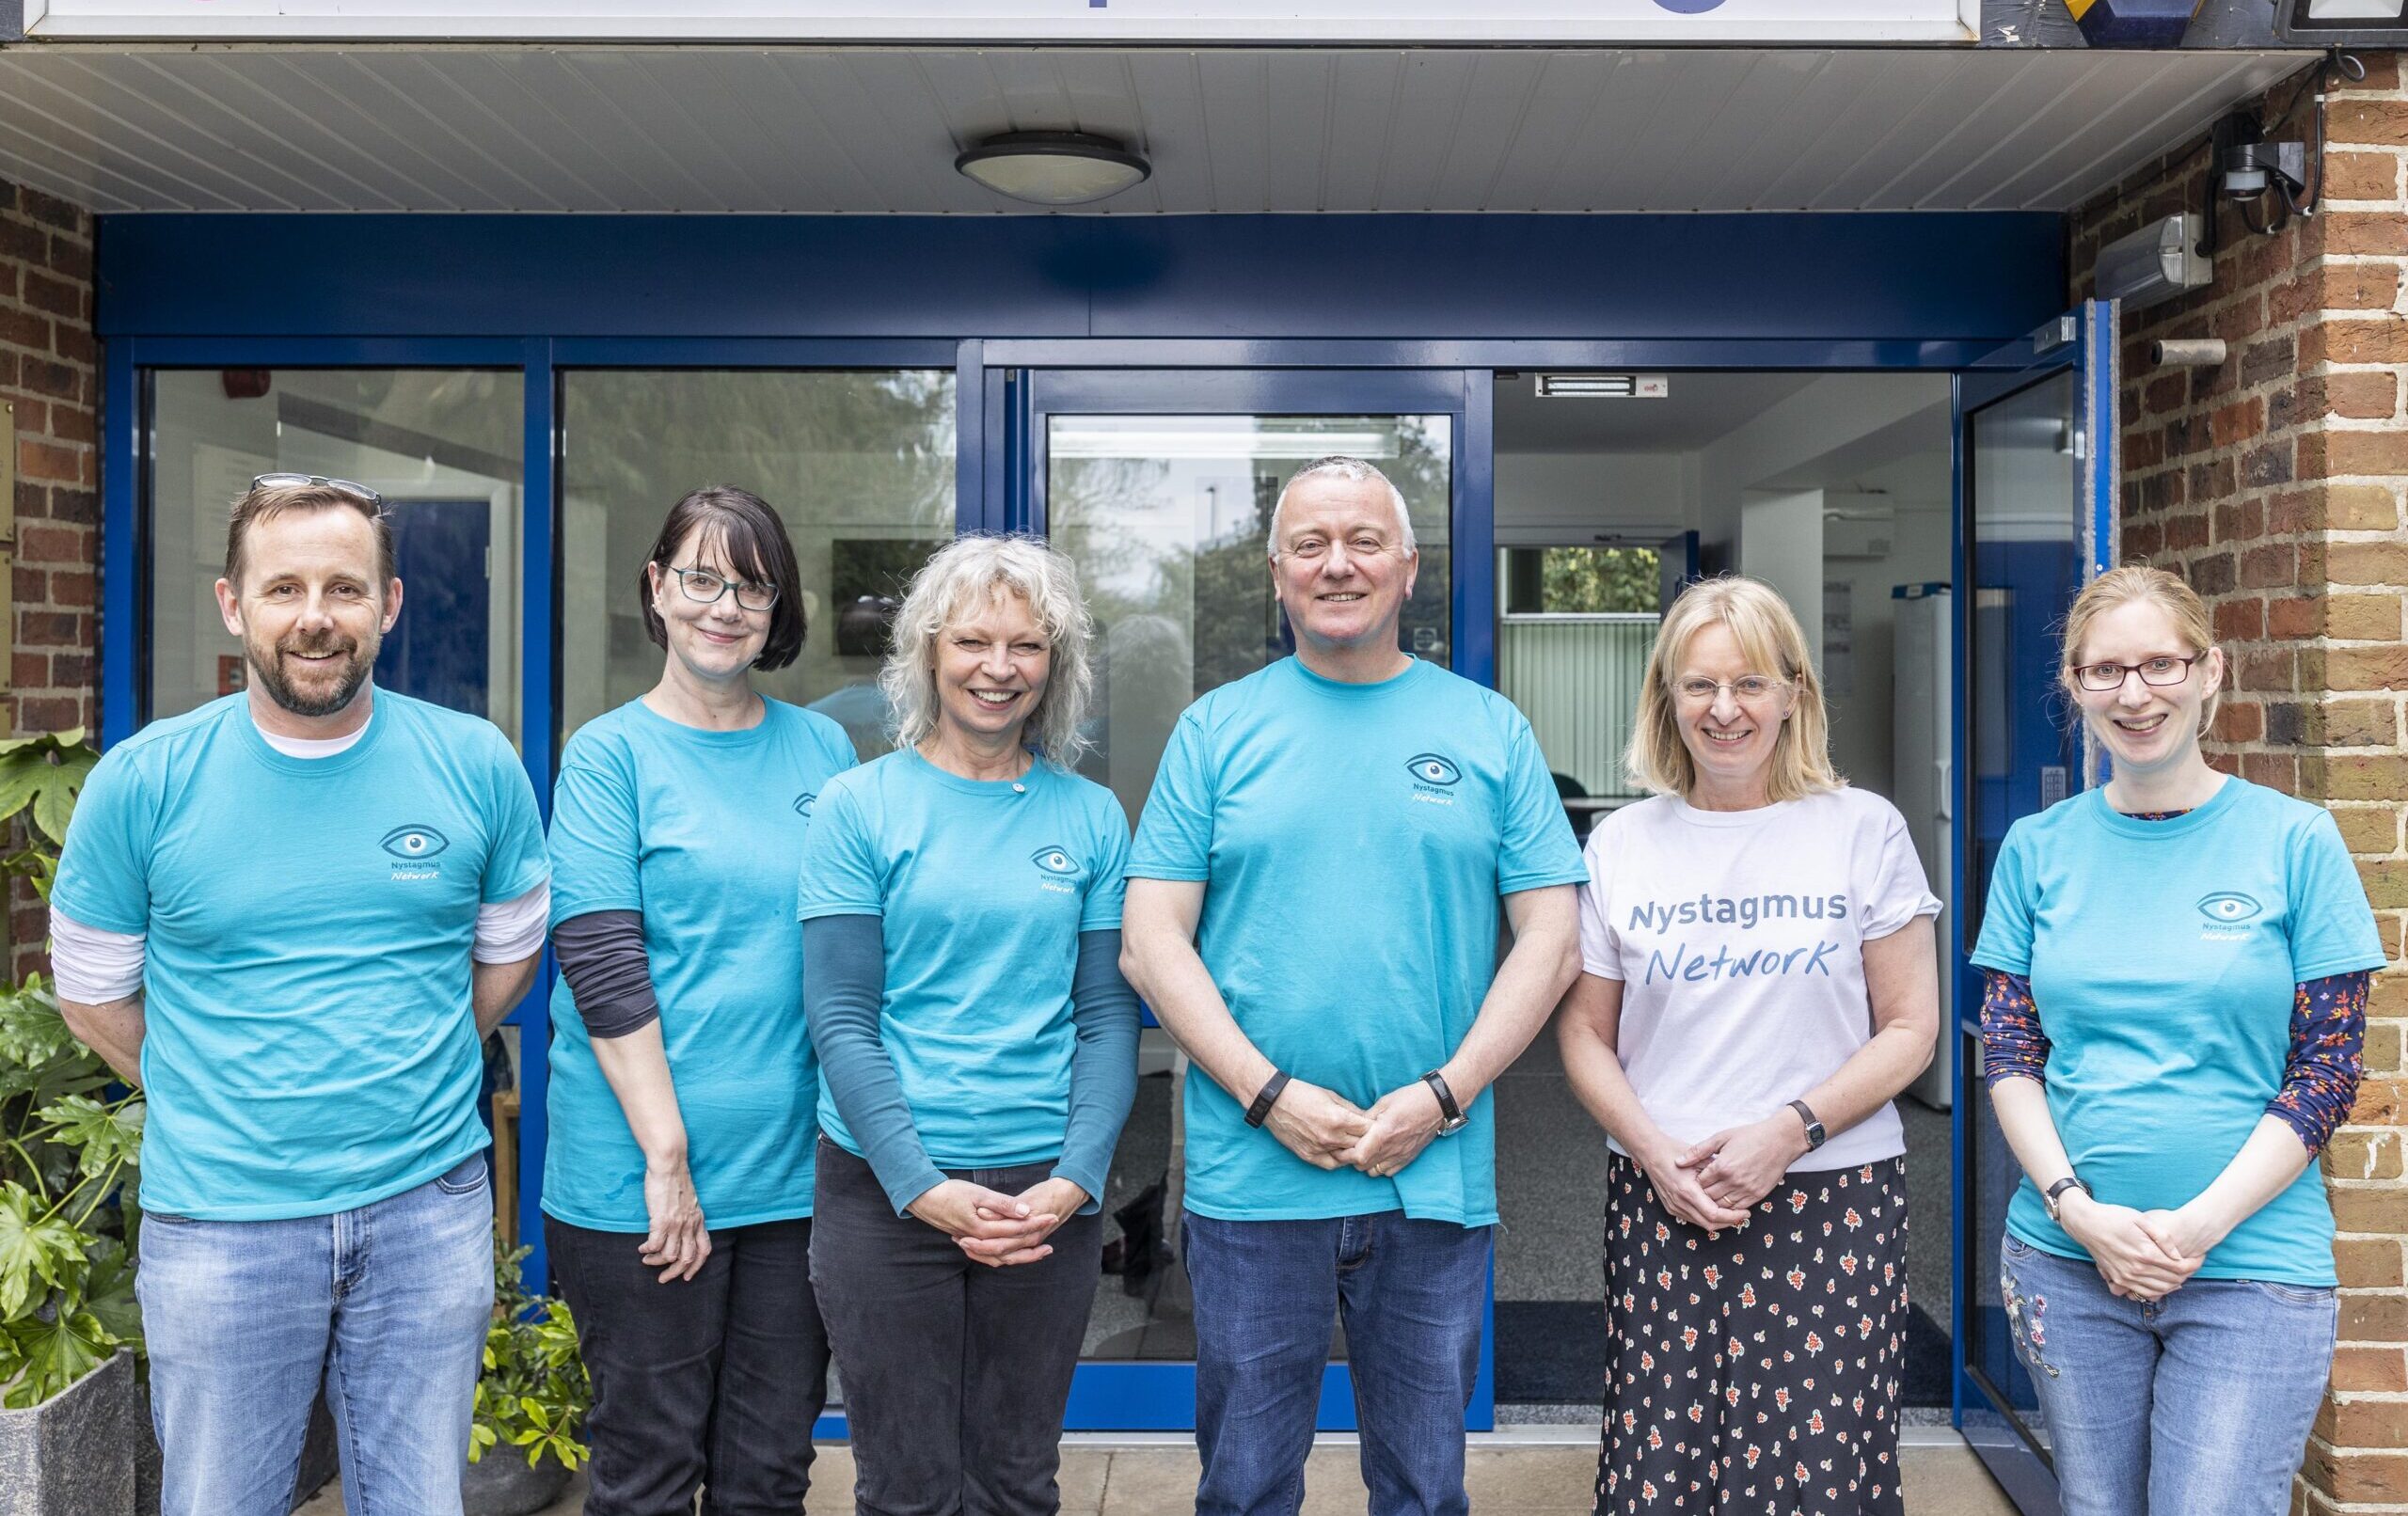 Nystagmus Network staff and trustees stand together.